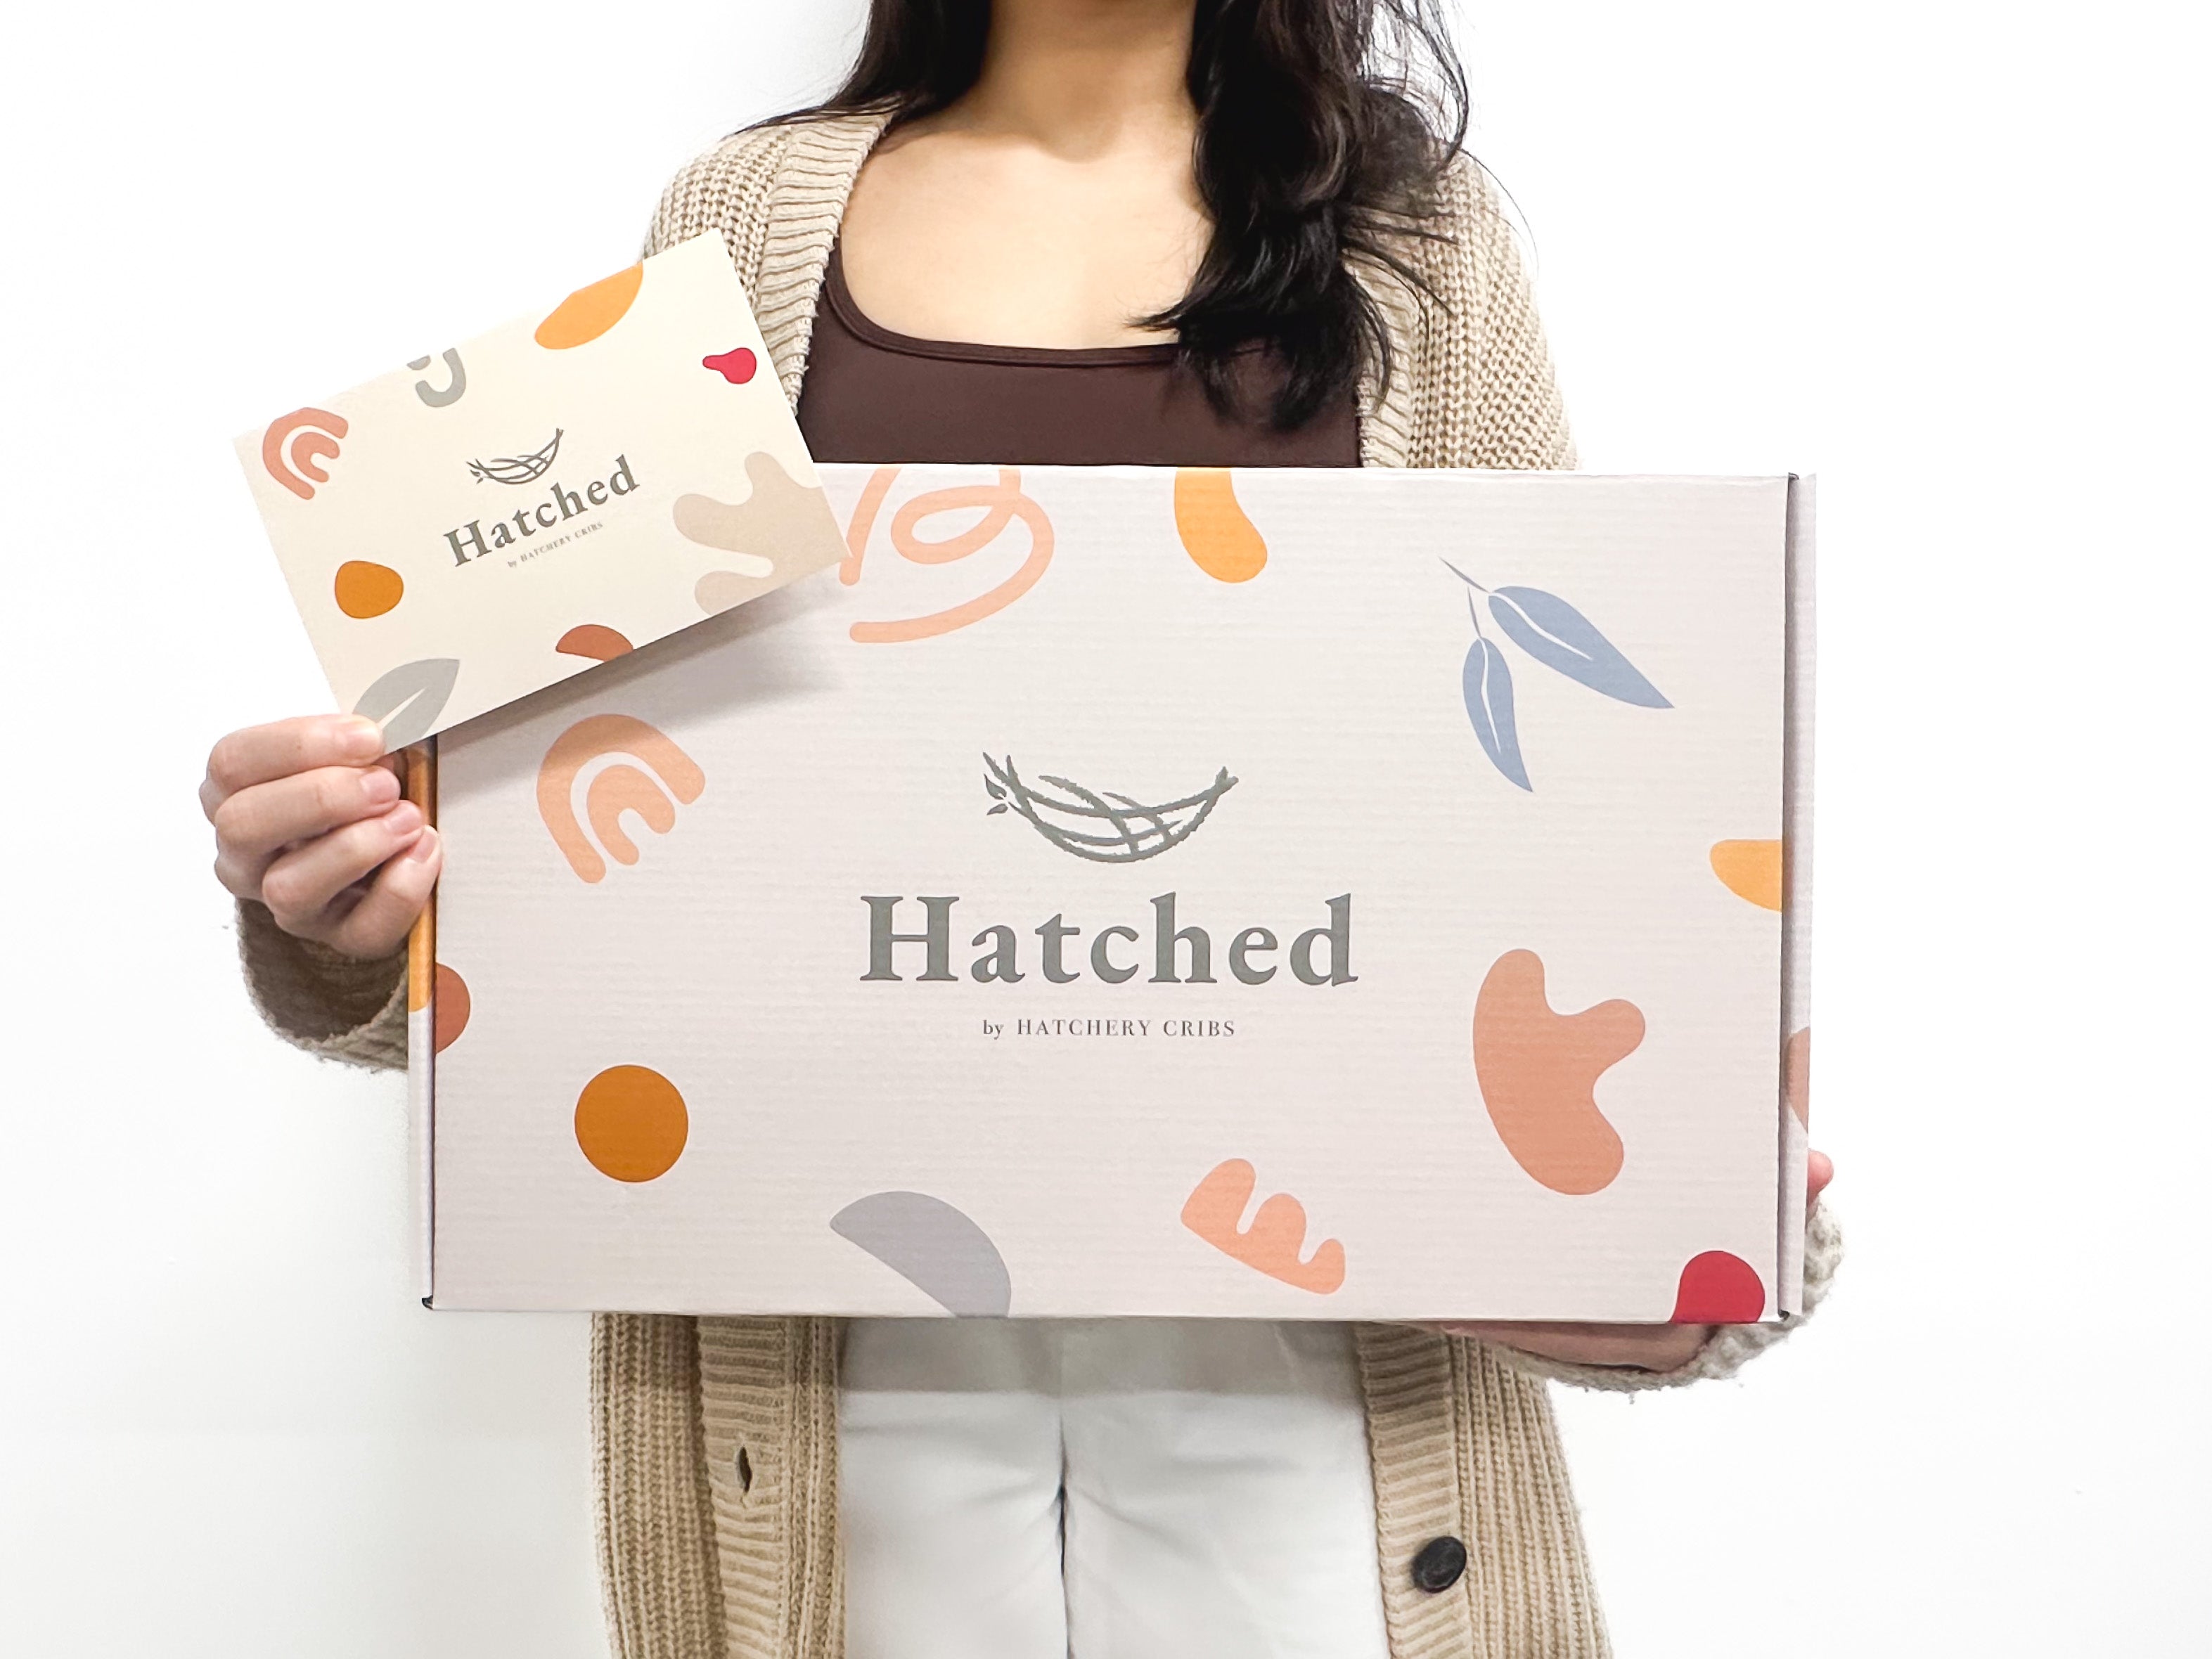 Hatched Gift Box & Gift Card